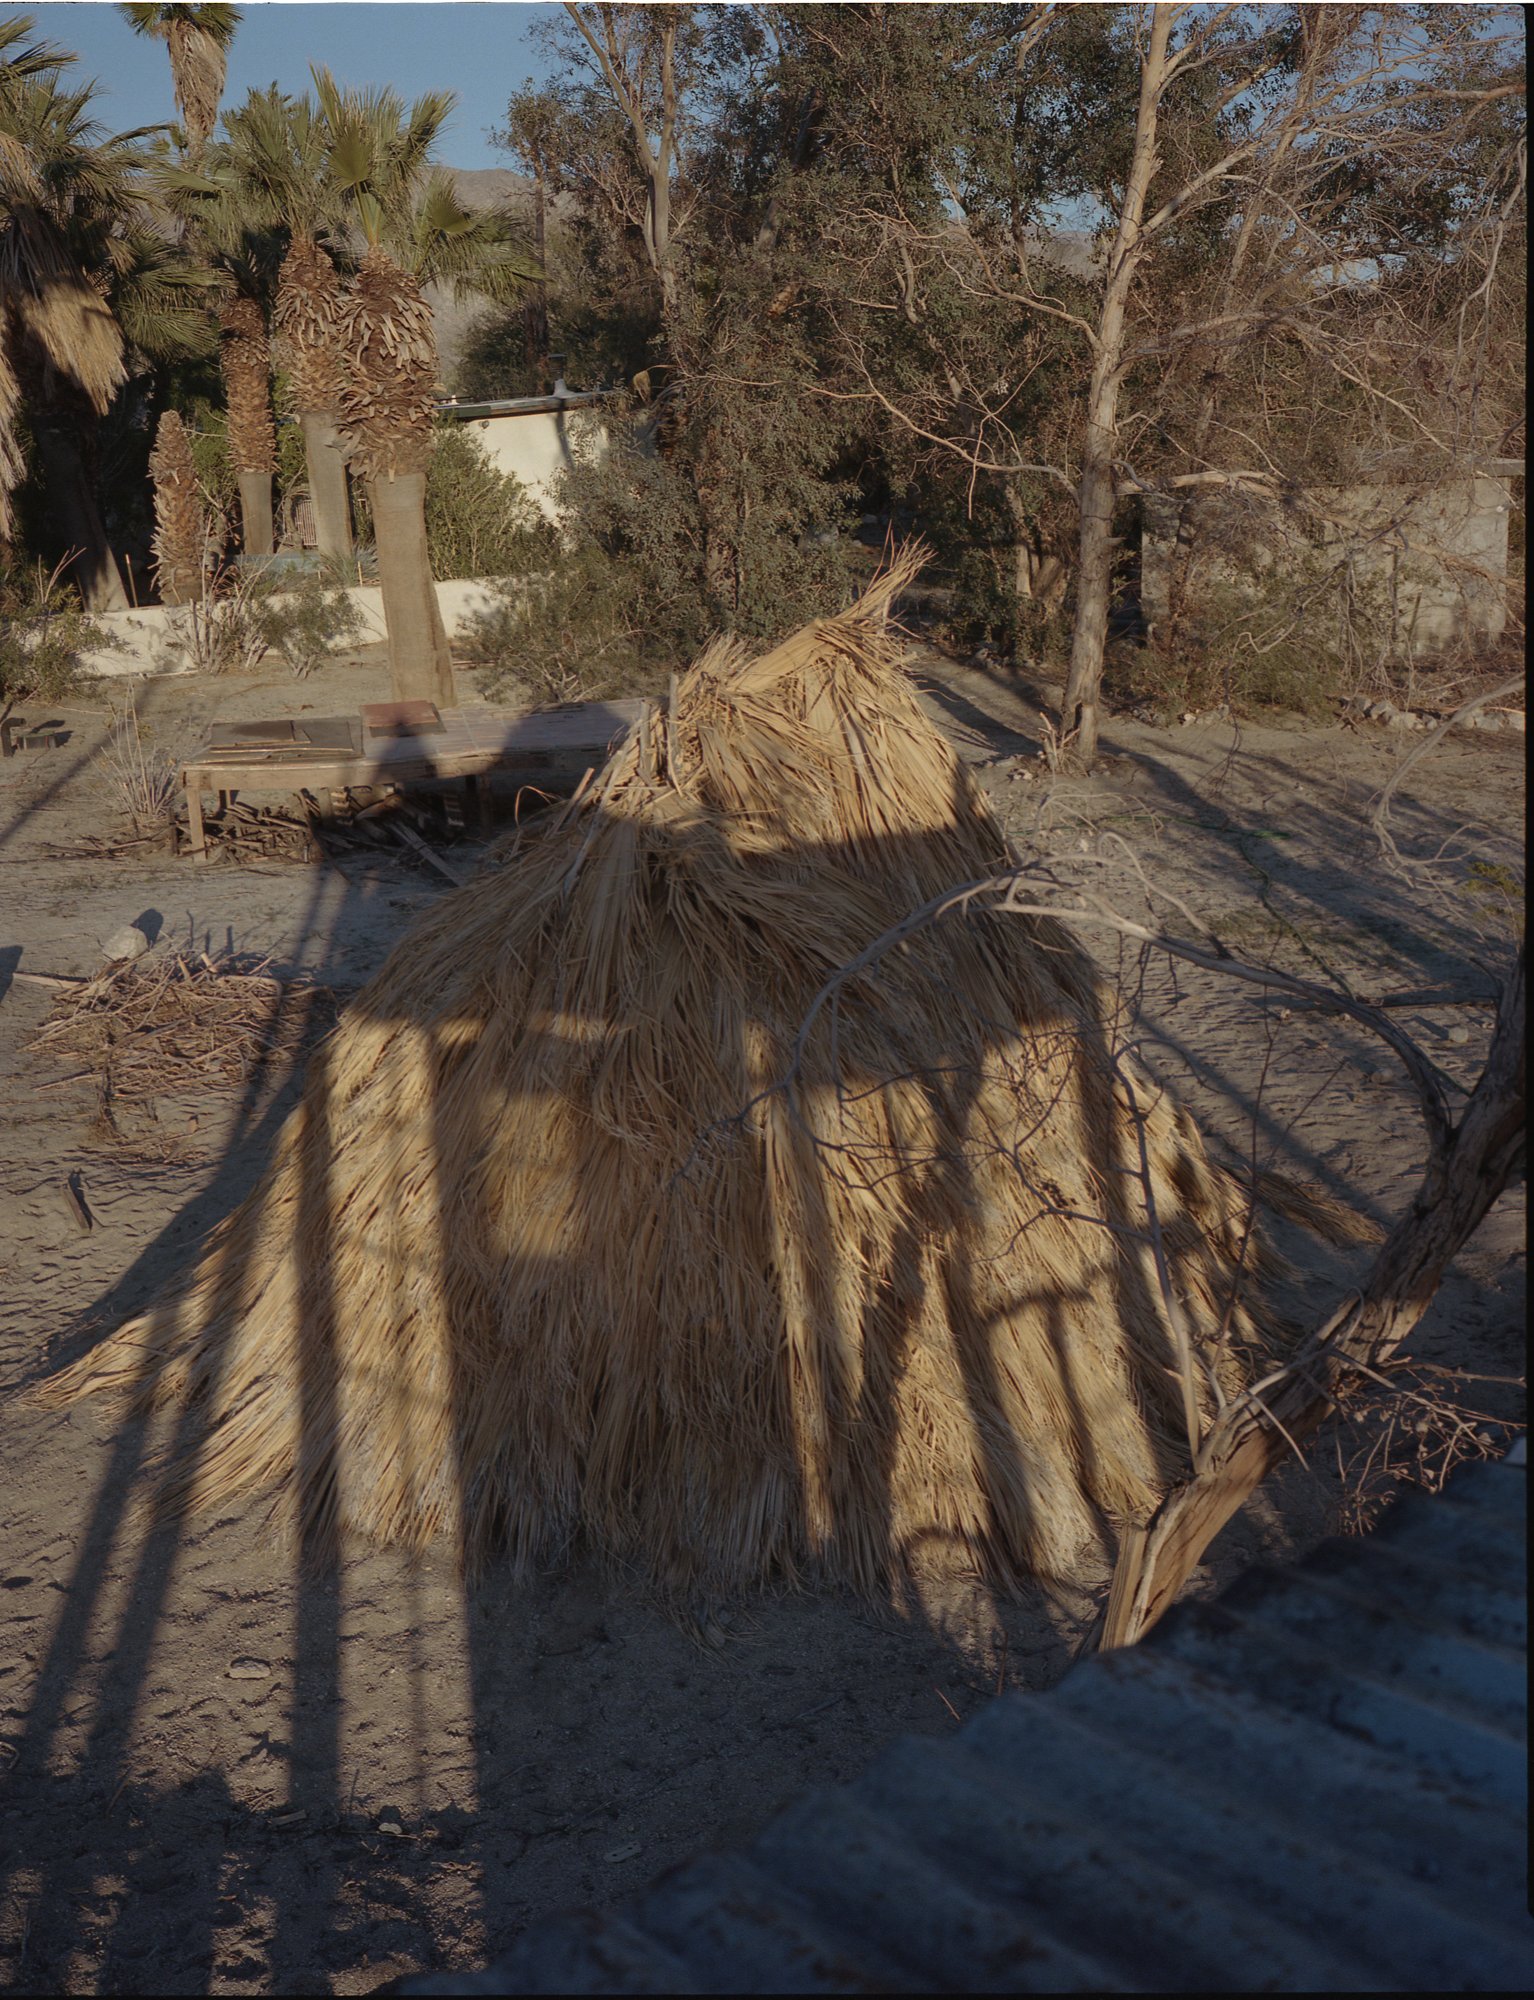  On my previous visit, I helped him build this palm frond hut.  